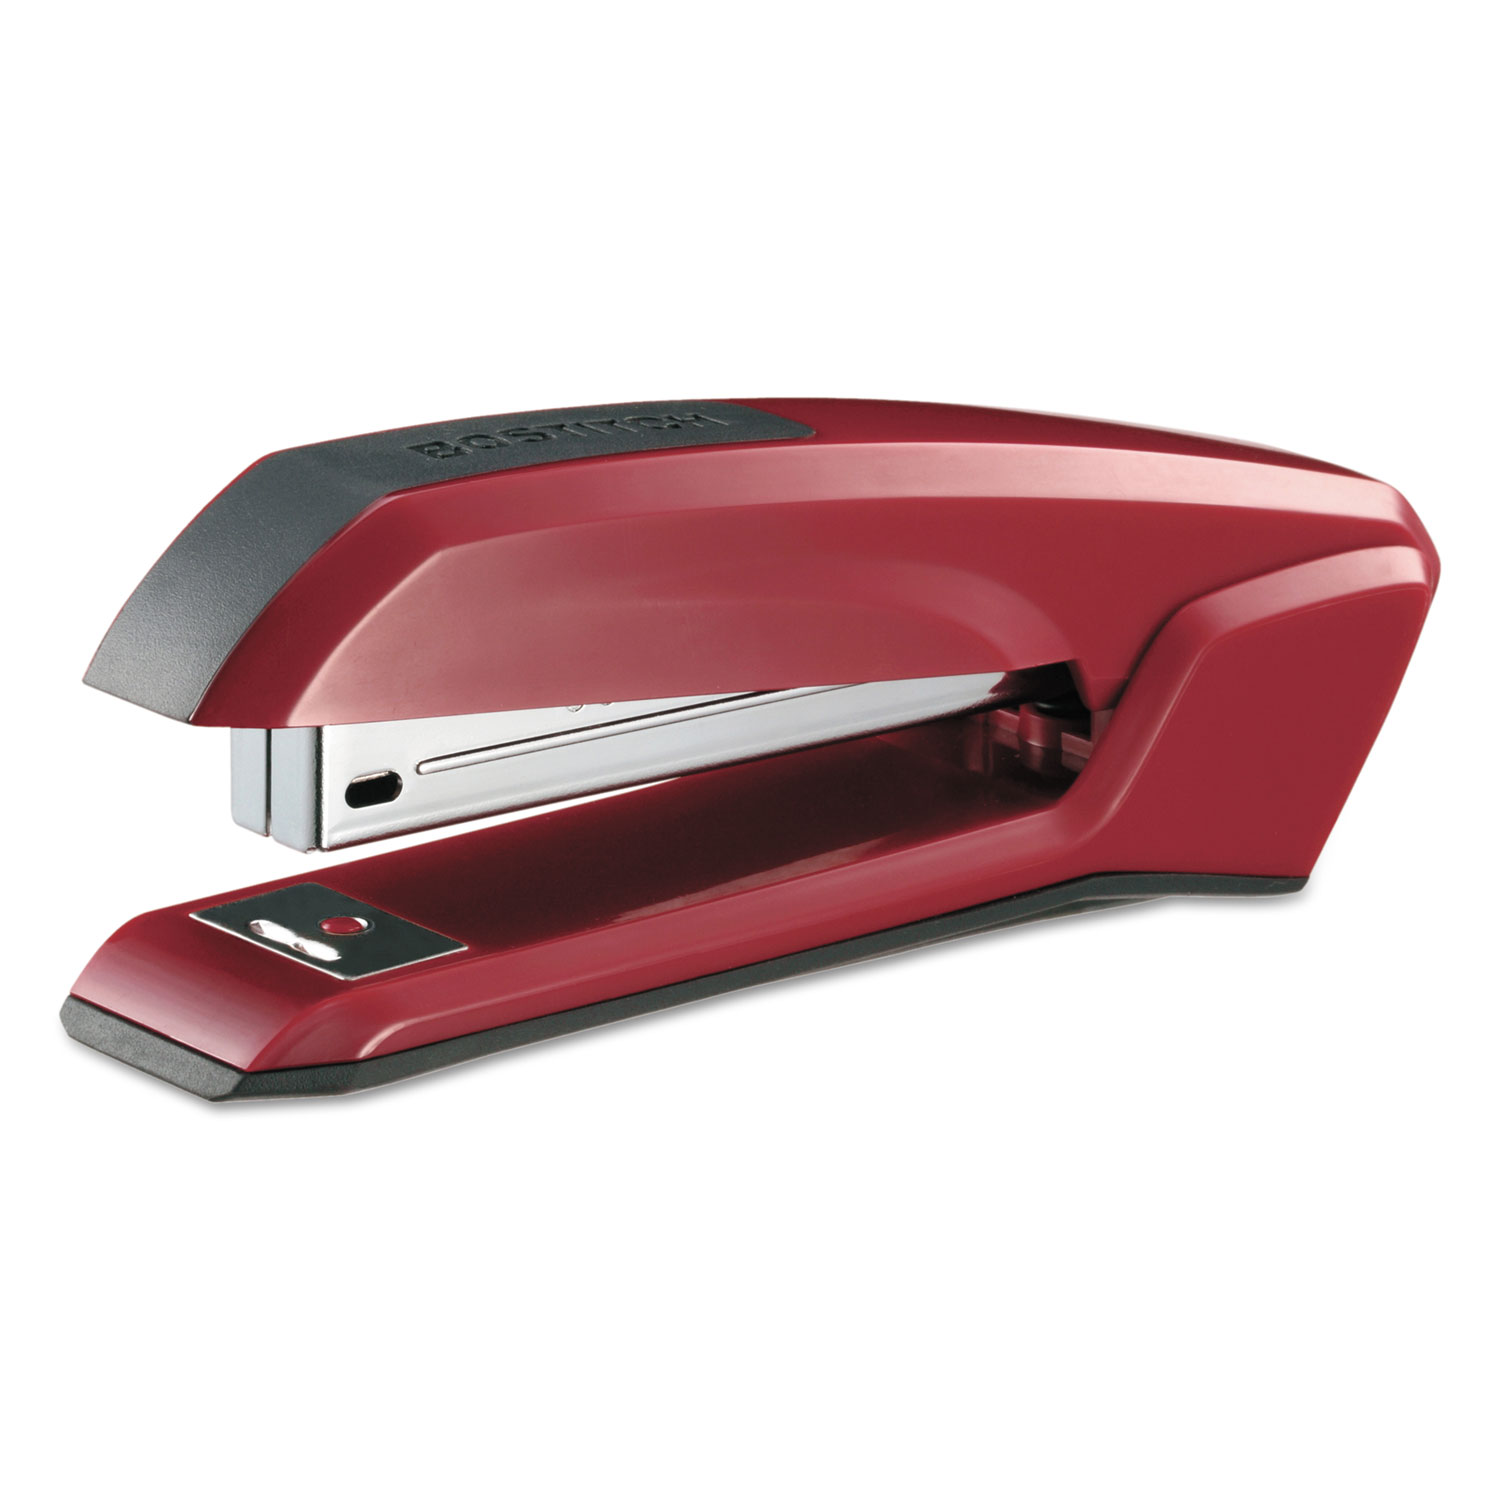  Bostitch B210R-RED Ascend Stapler, 20-Sheet Capacity, Red (BOSB210RRED) 